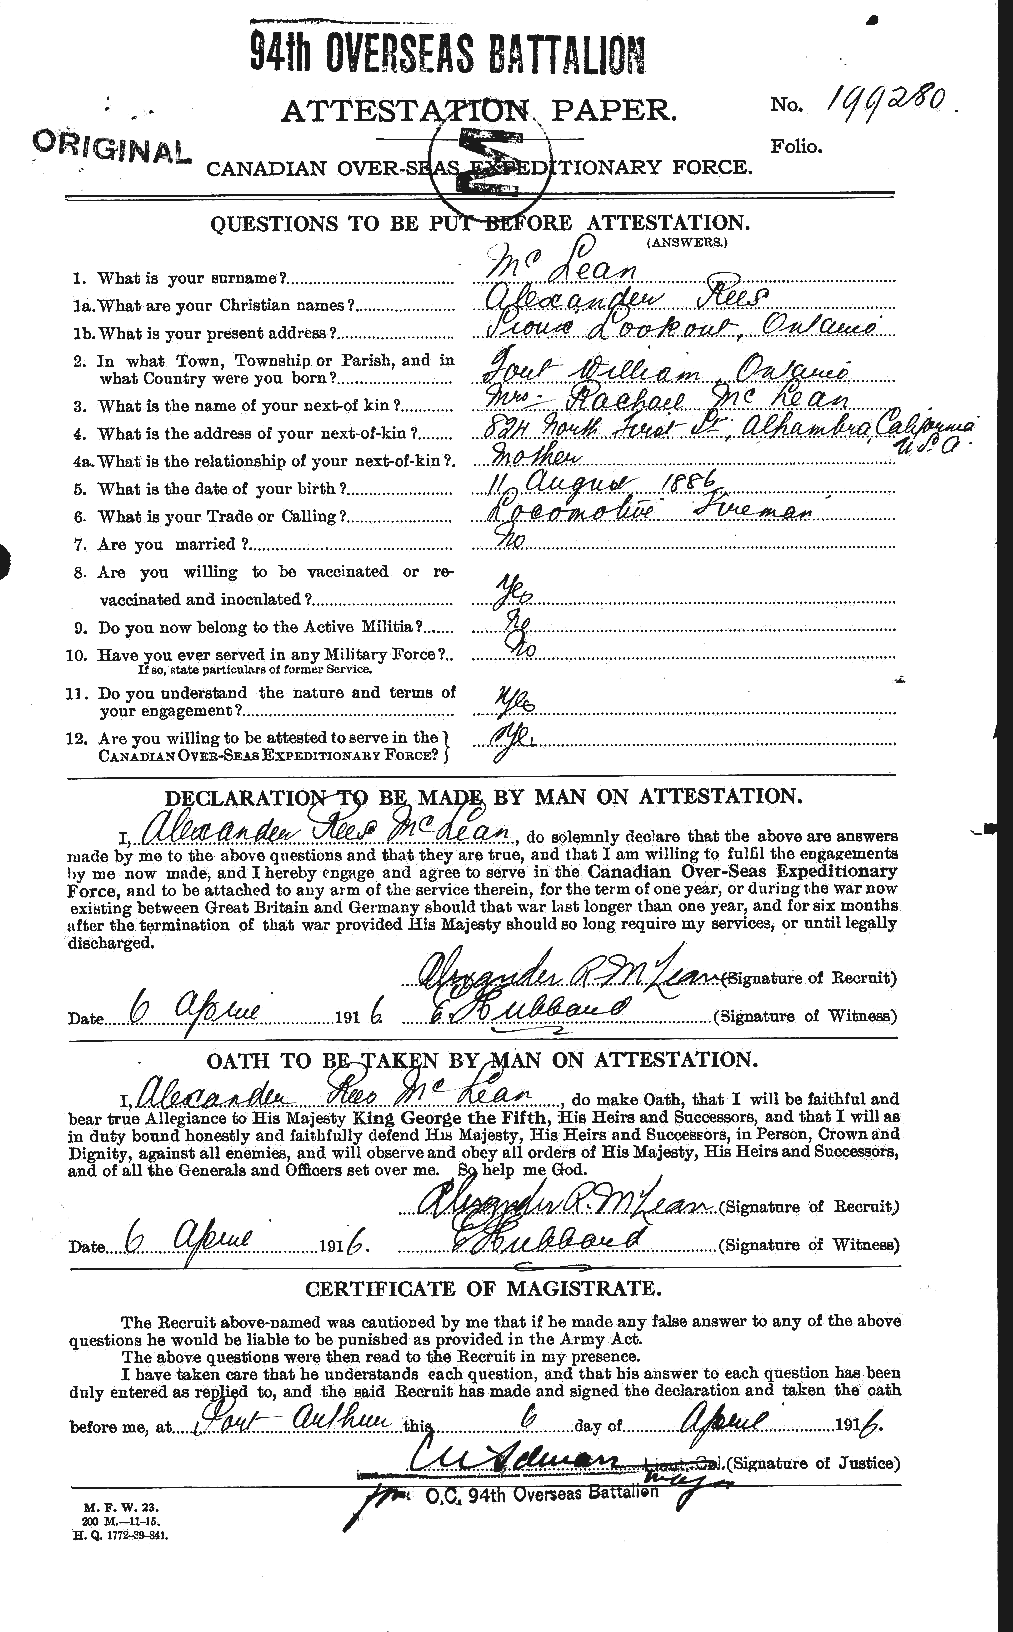 Personnel Records of the First World War - CEF 532766a